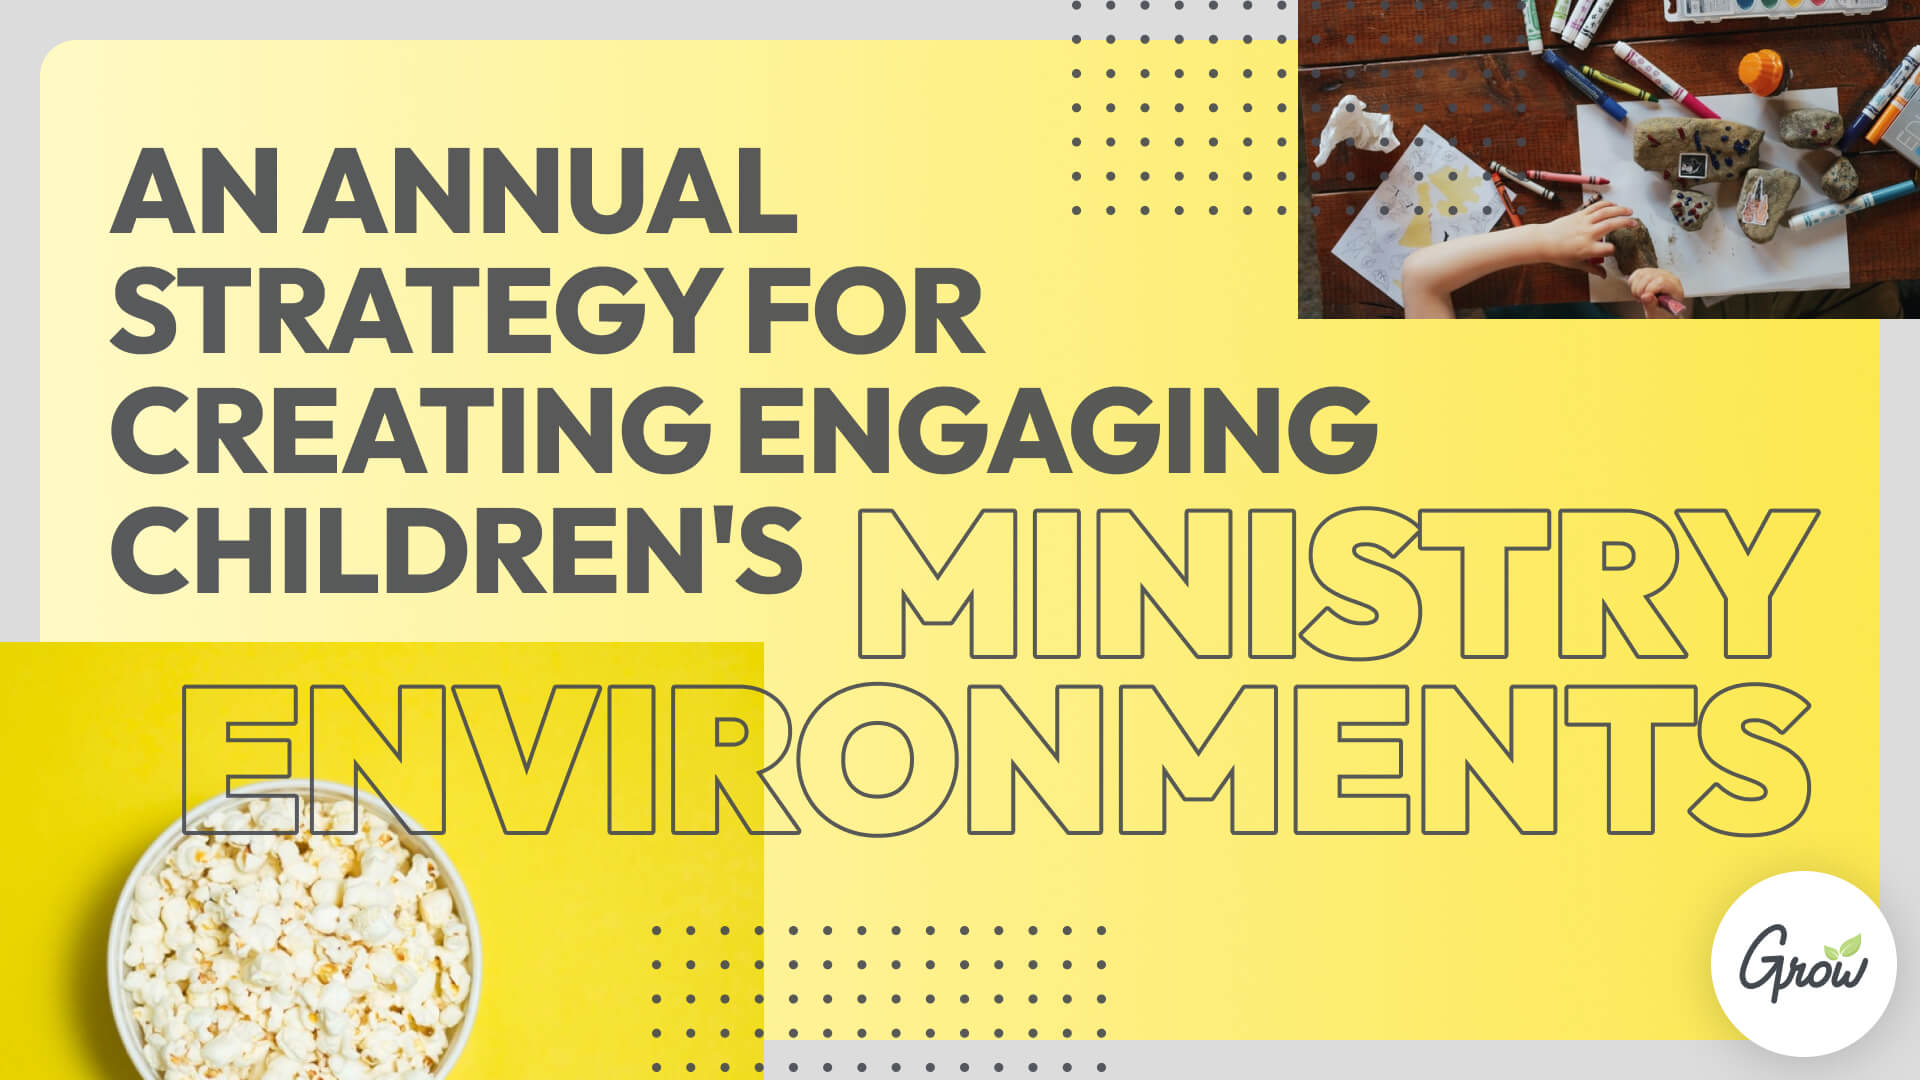 An Annual Strategy for Creating Engaging Children's Ministry Environments